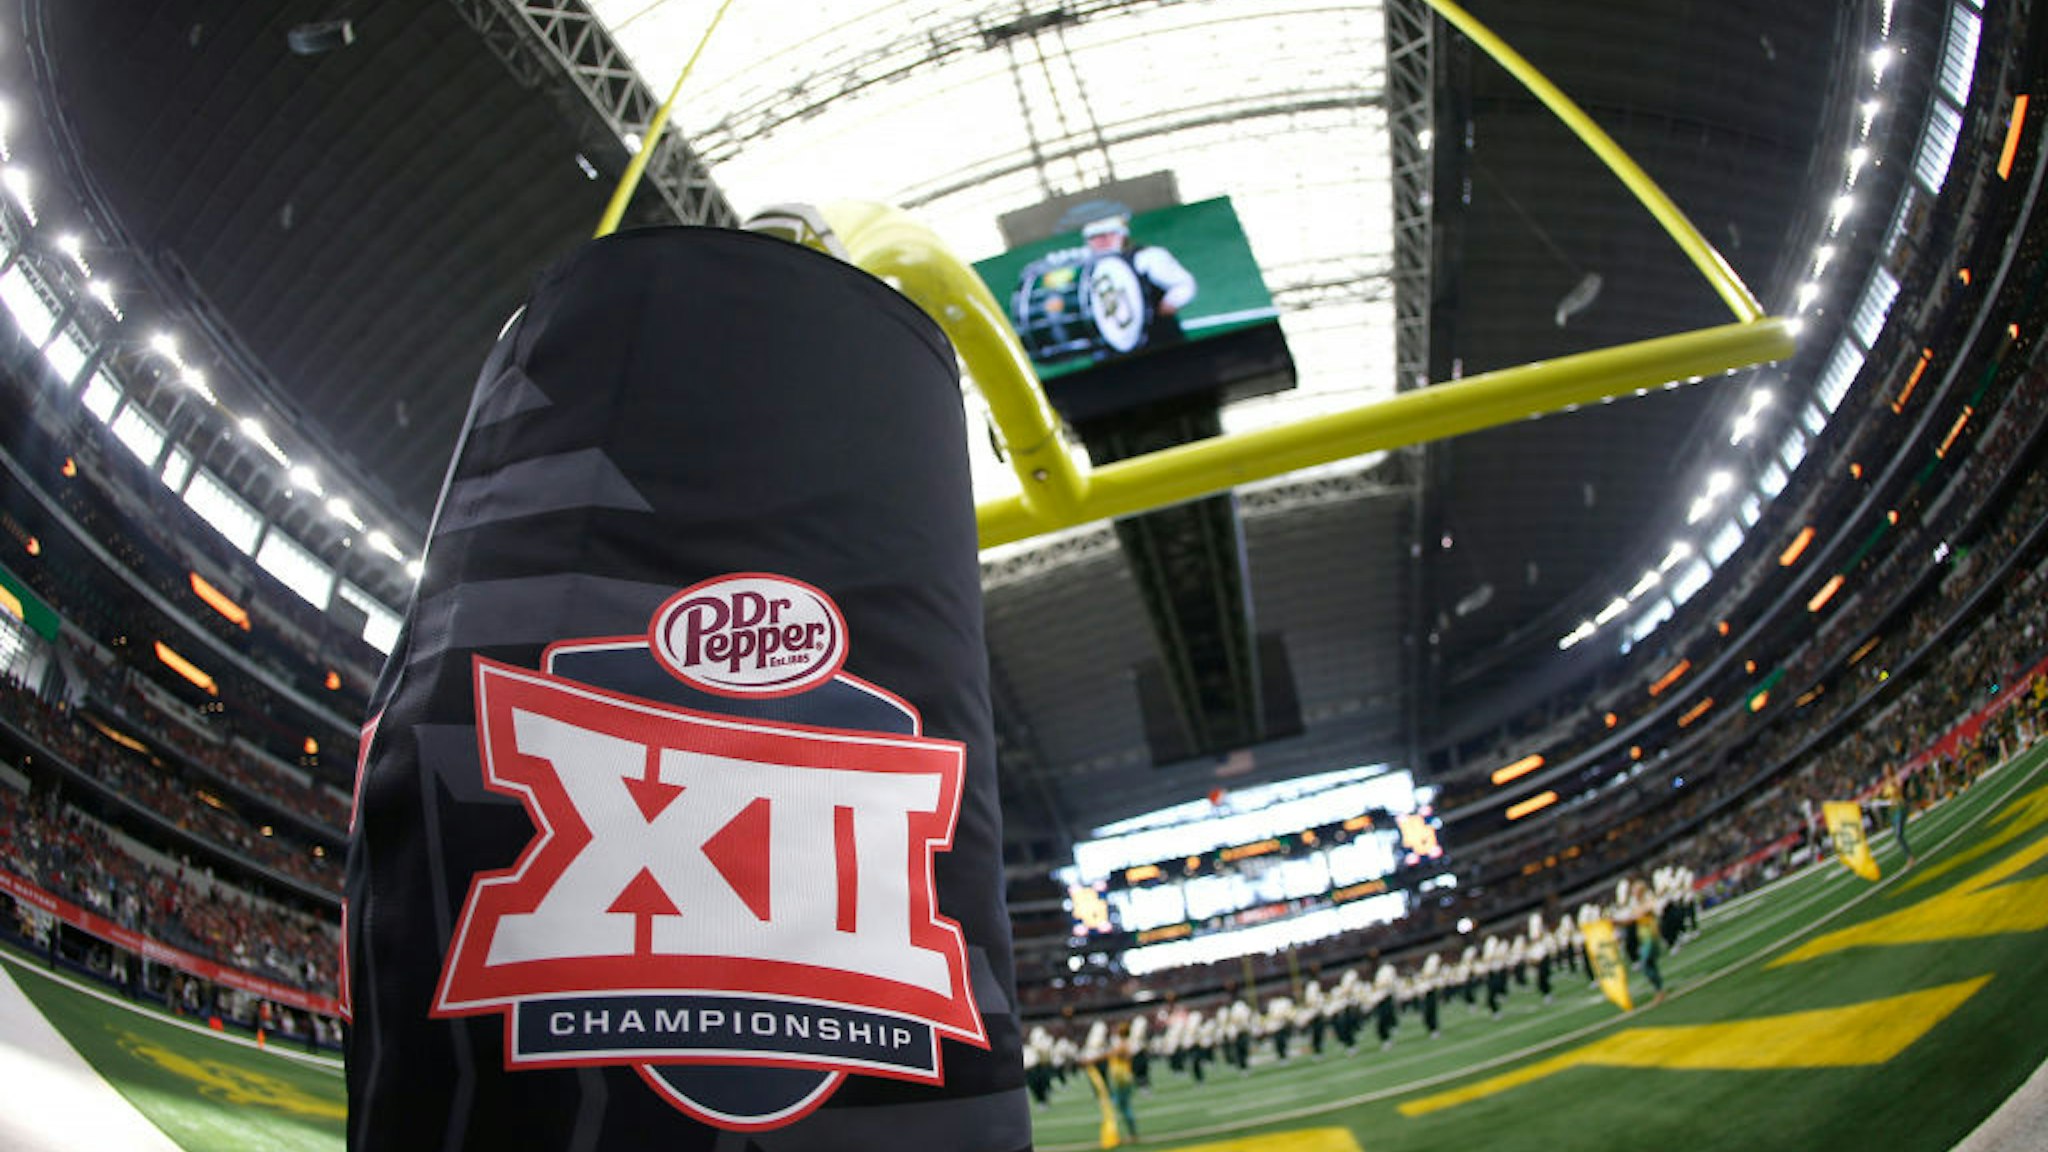 ARLINGTON, TX - DECEMBER 07, 2019 - Detail view of Big 12 logo as the Baylor Bears band plays on the field before Baylor plays the Oklahoma Sooners in the Big 12 Football Championship at AT&amp;T Stadium on December 7, 2019 in Arlington, Texas. (Photo by Ron Jenkins/Getty Images)